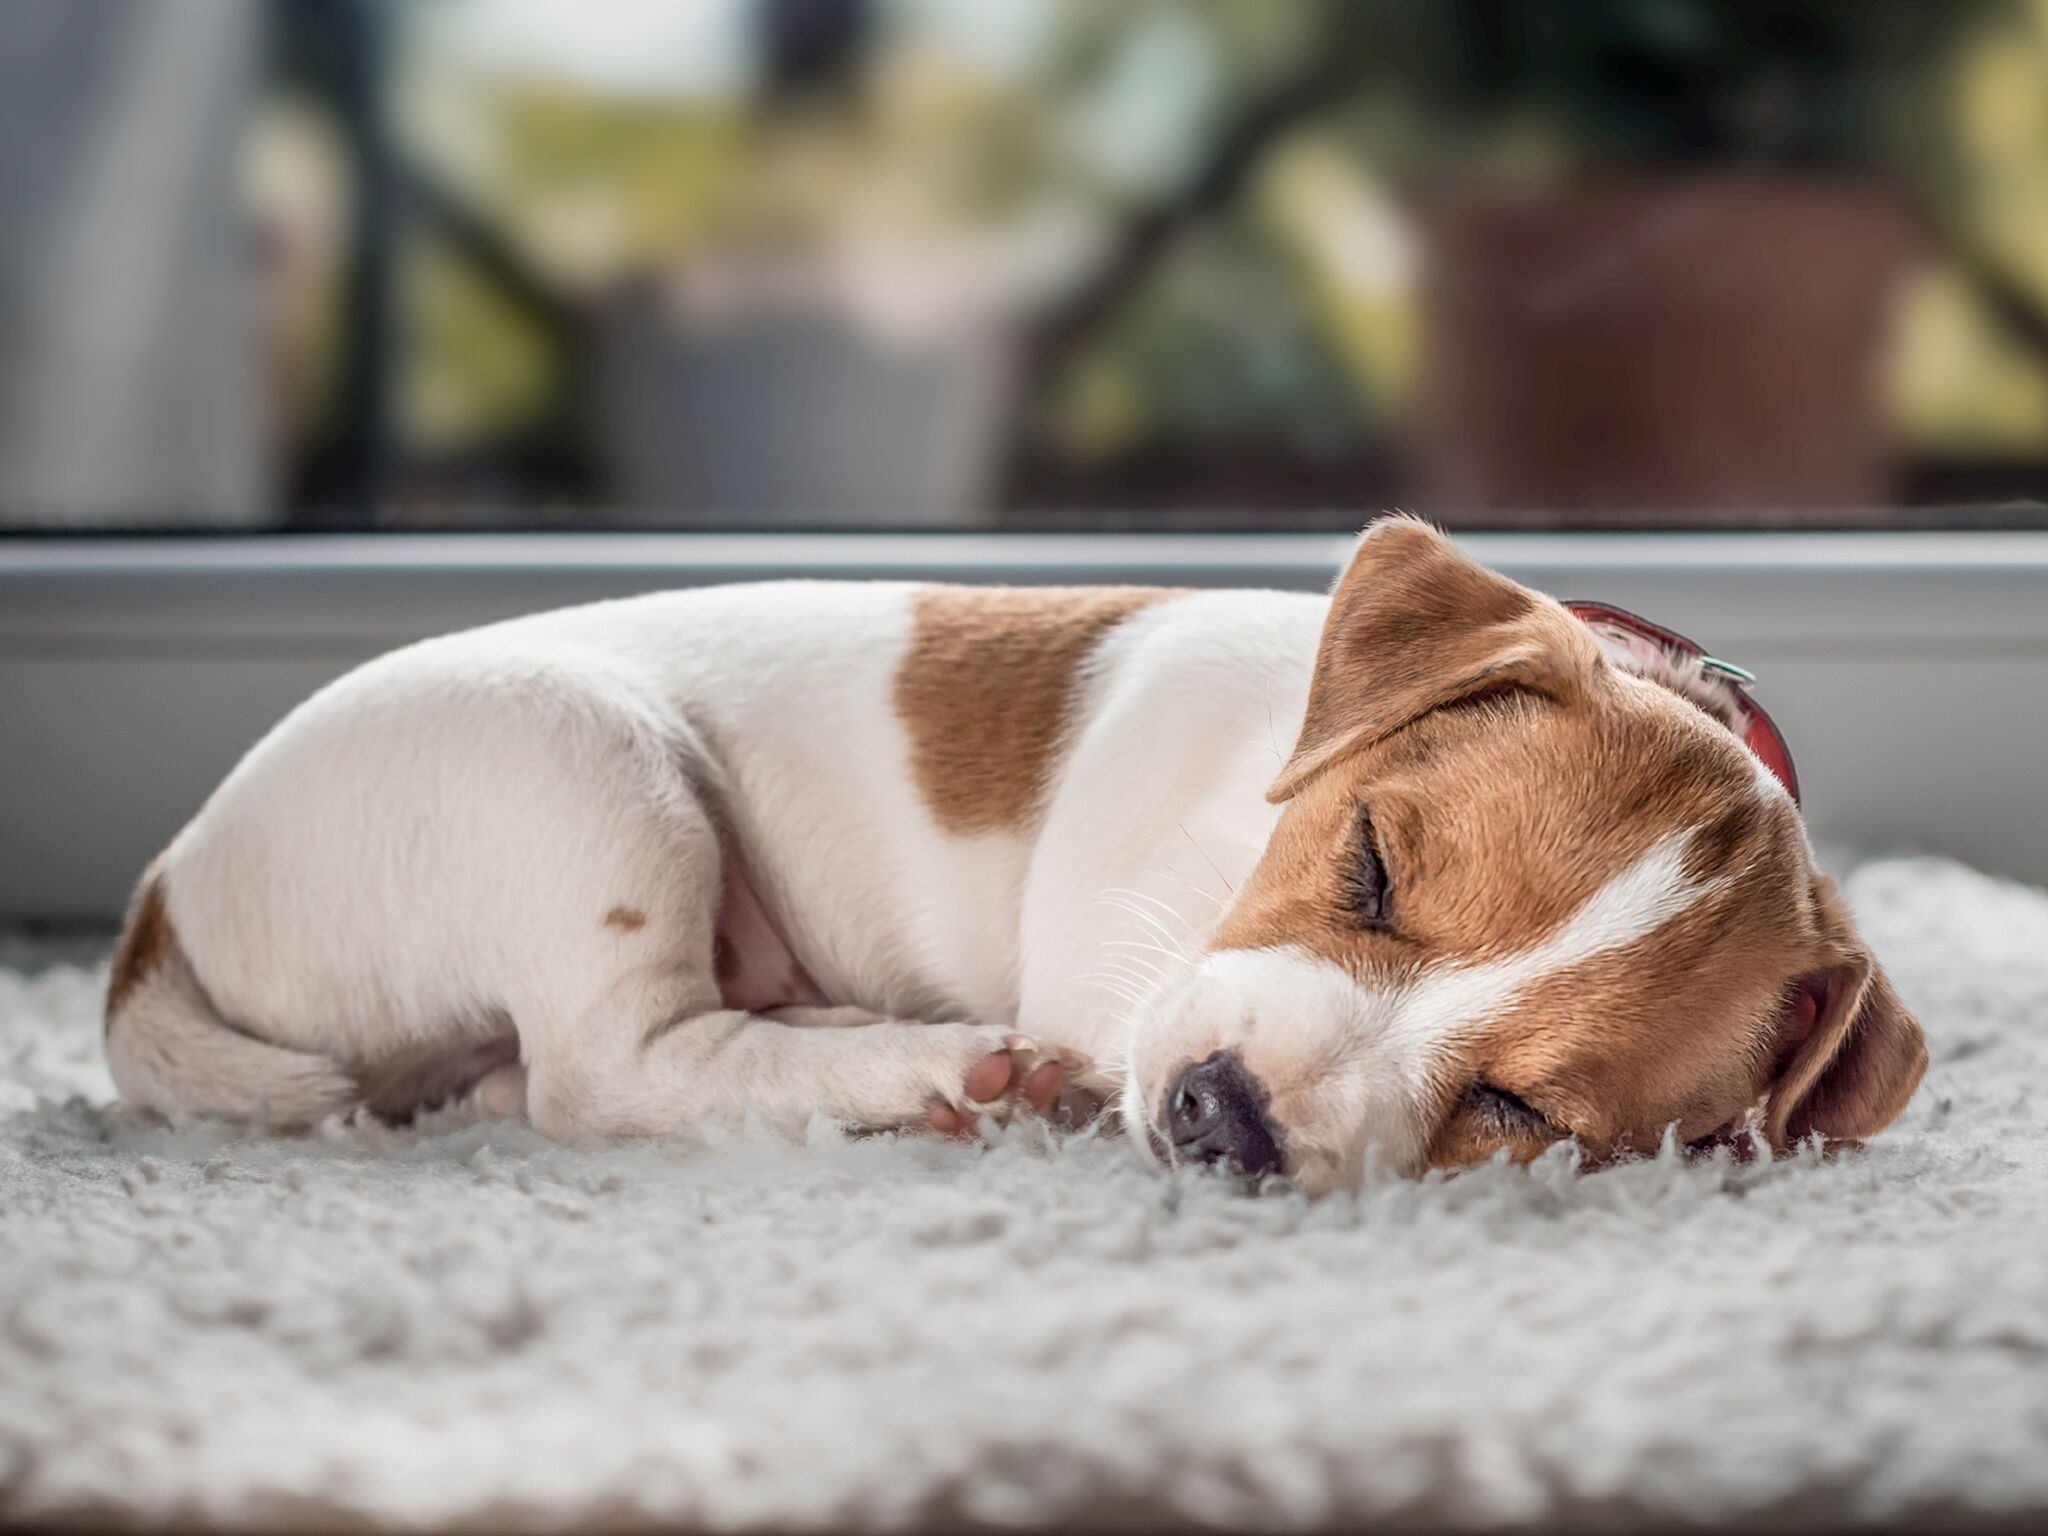 Jack Russell Terrier puppy sleeping on a white rug next to a window